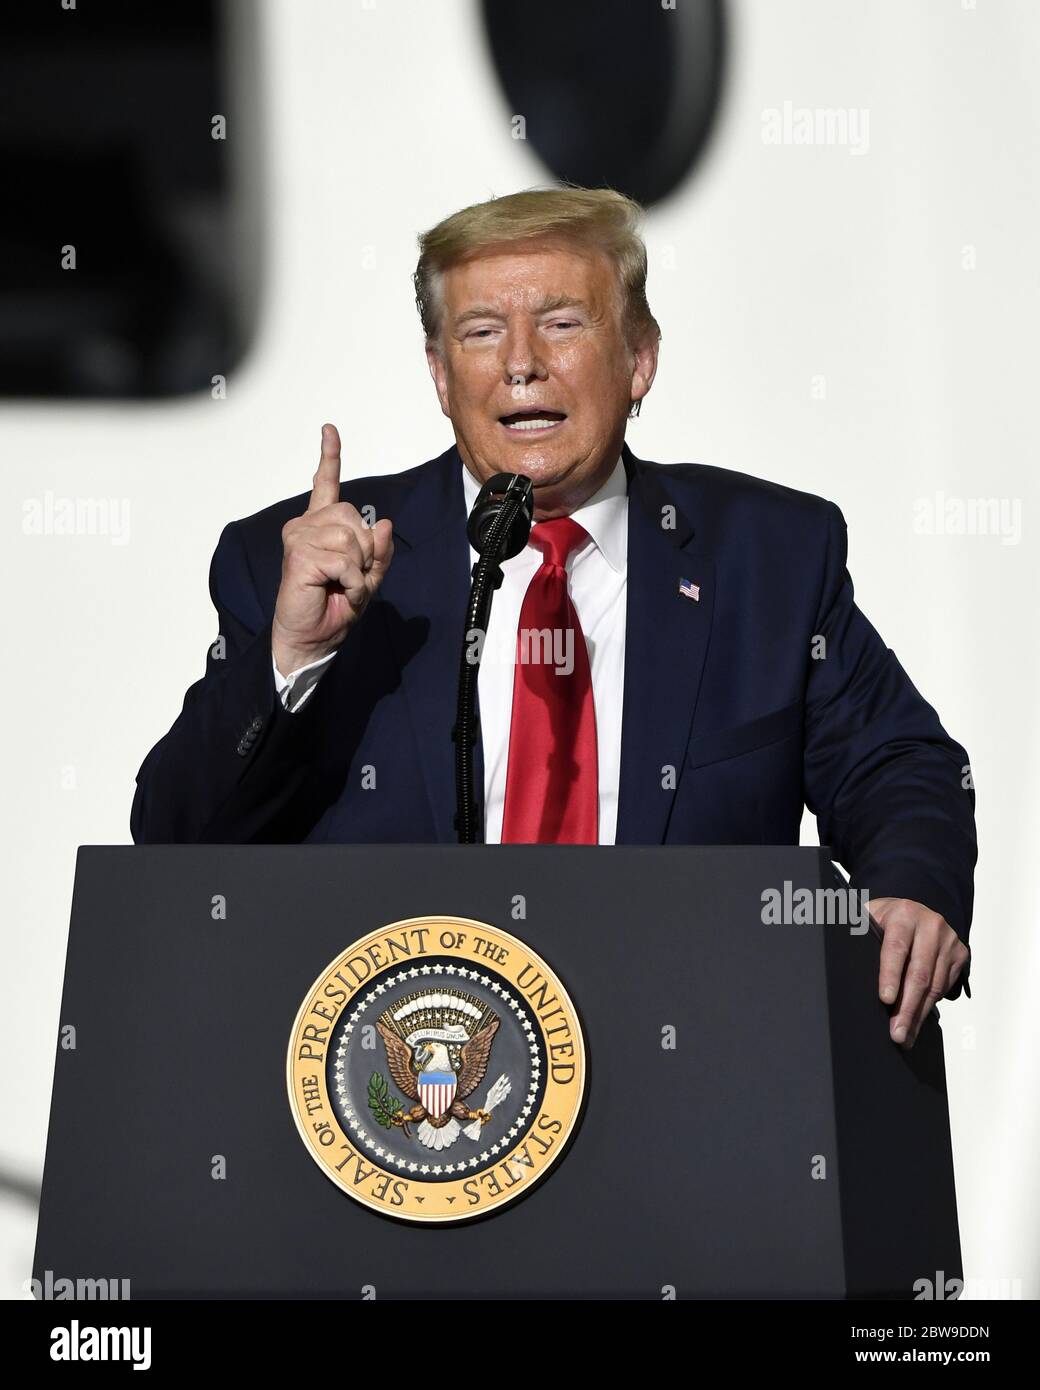 Kennedy Space Center, United States. 30th May, 2020. President Donald Trump makes remarks following the launch of the first crewed NASA/SpaceX mission from the Kennedy Space Center on Saturday, May 30, 2020. Photo by Joe Marino/UPI Credit: UPI/Alamy Live News Stock Photo